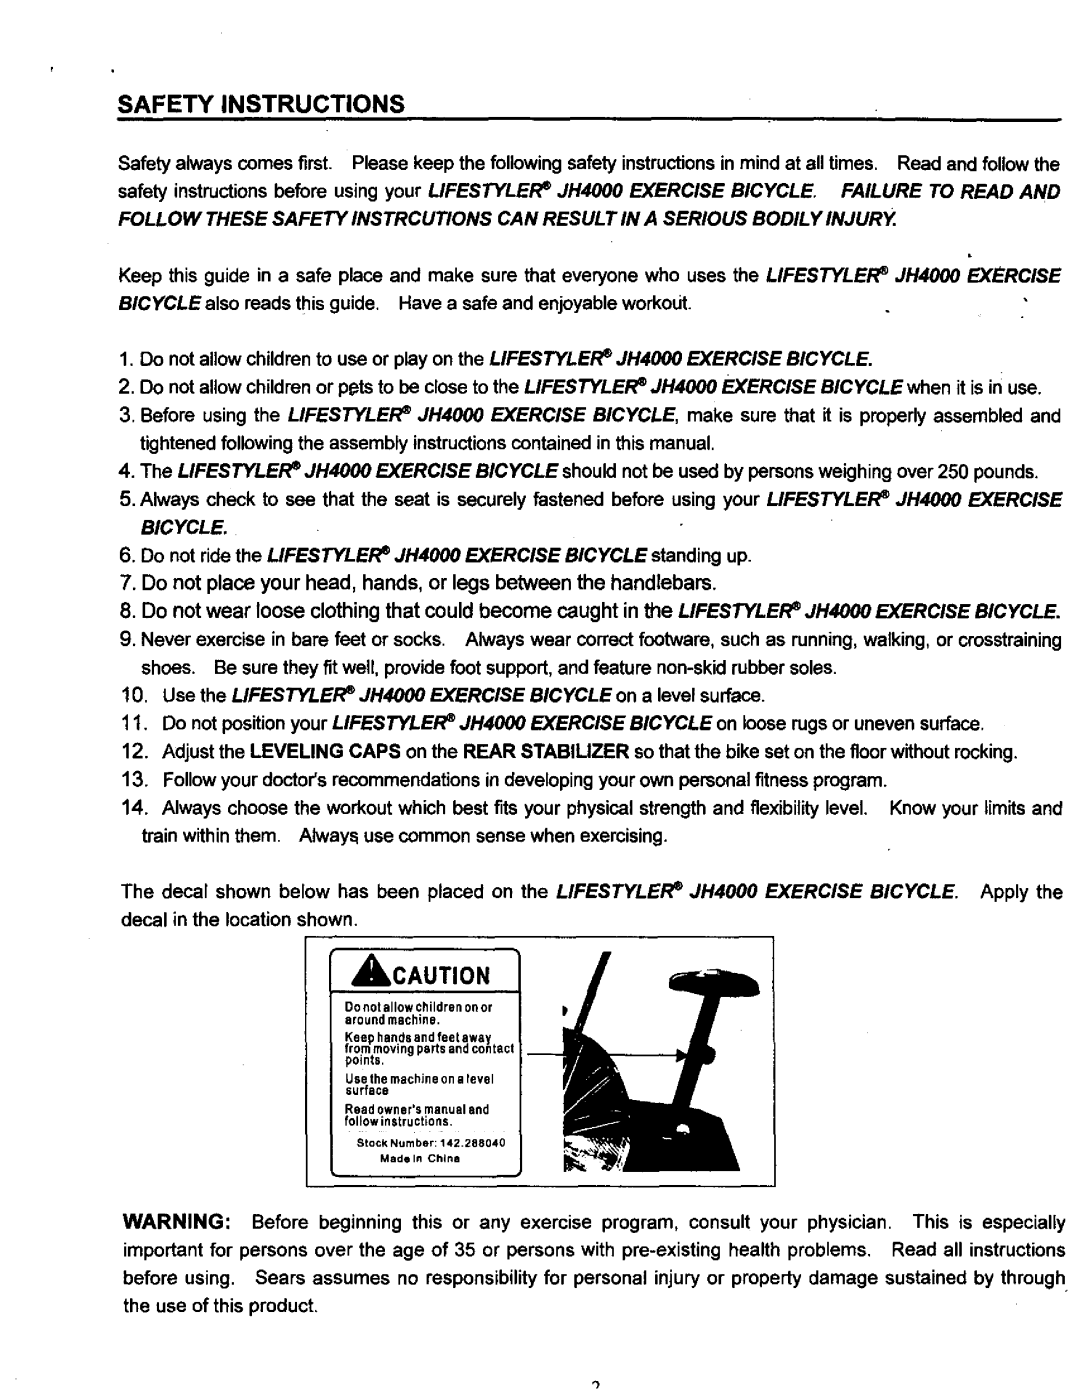 Sears JH4000, 142.288040 operating instructions Safety Instructions, Ilcaution 